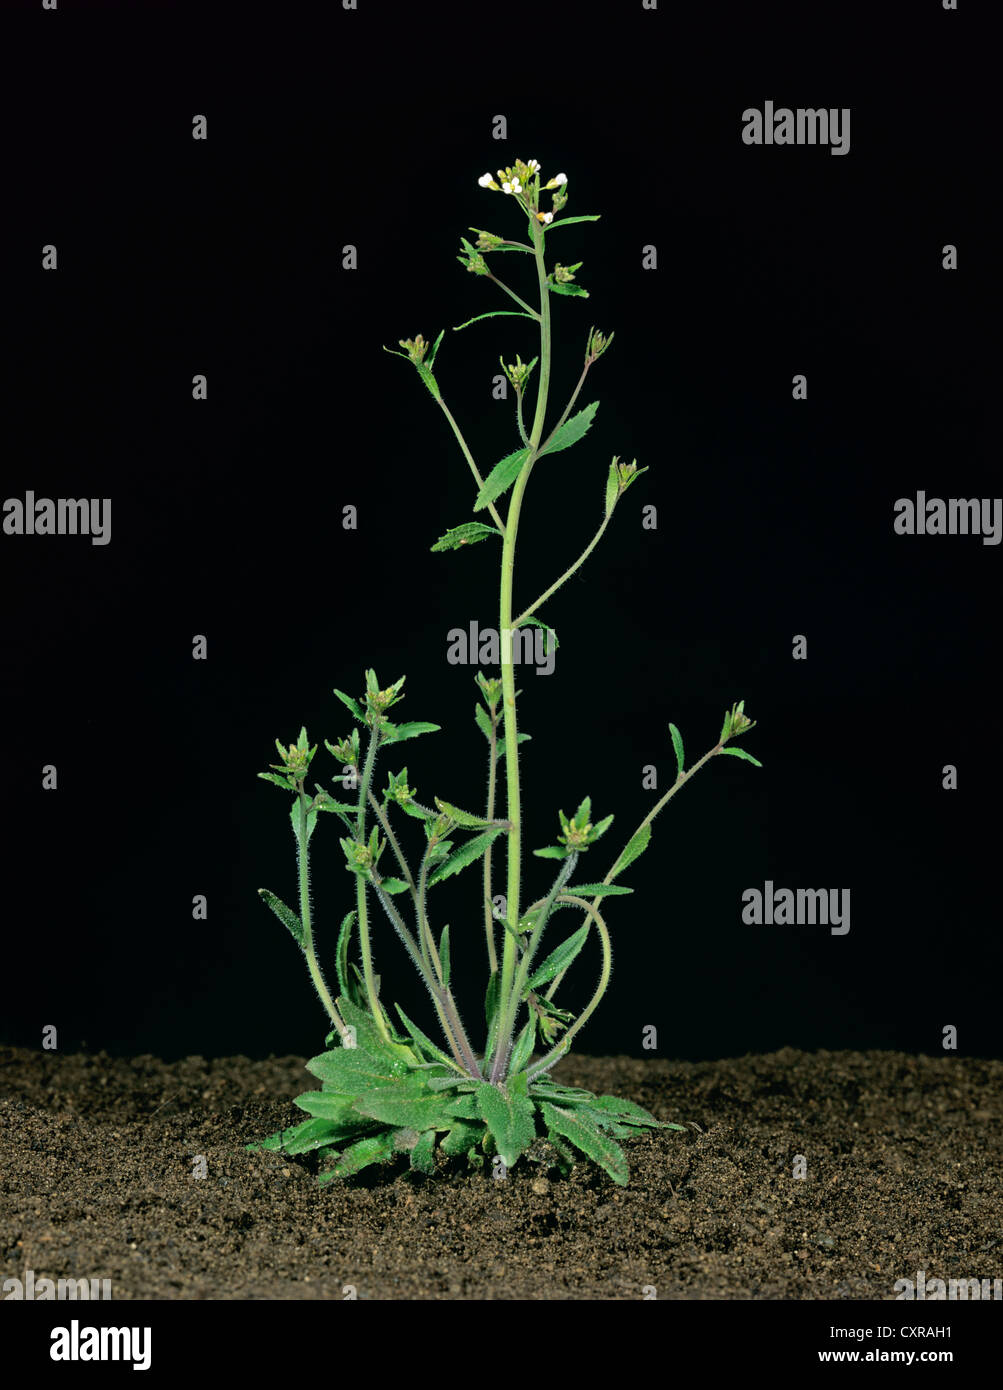 Thale cress (Arabidopsis thaliana) flowering plant used in genetic experiments Stock Photo